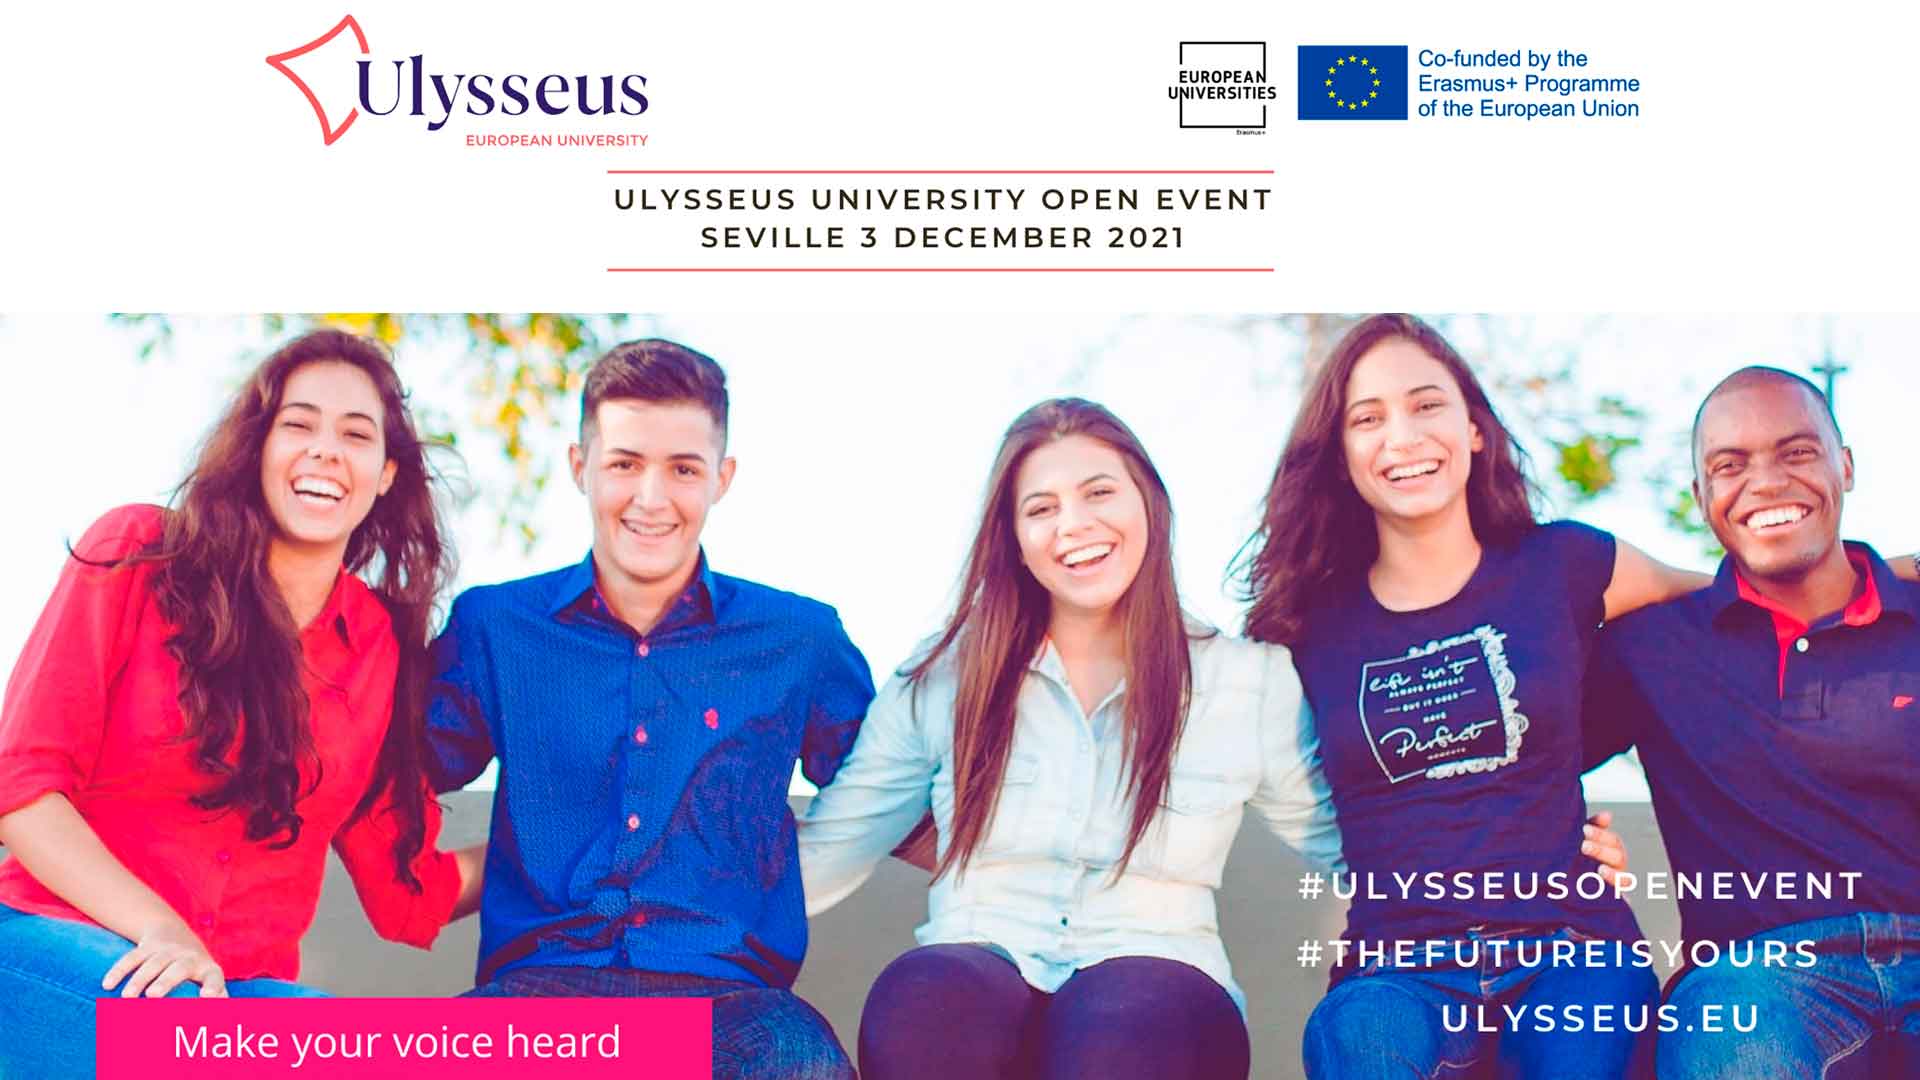 Ulysseus holds an open event for students to voice their opinions on key education topics